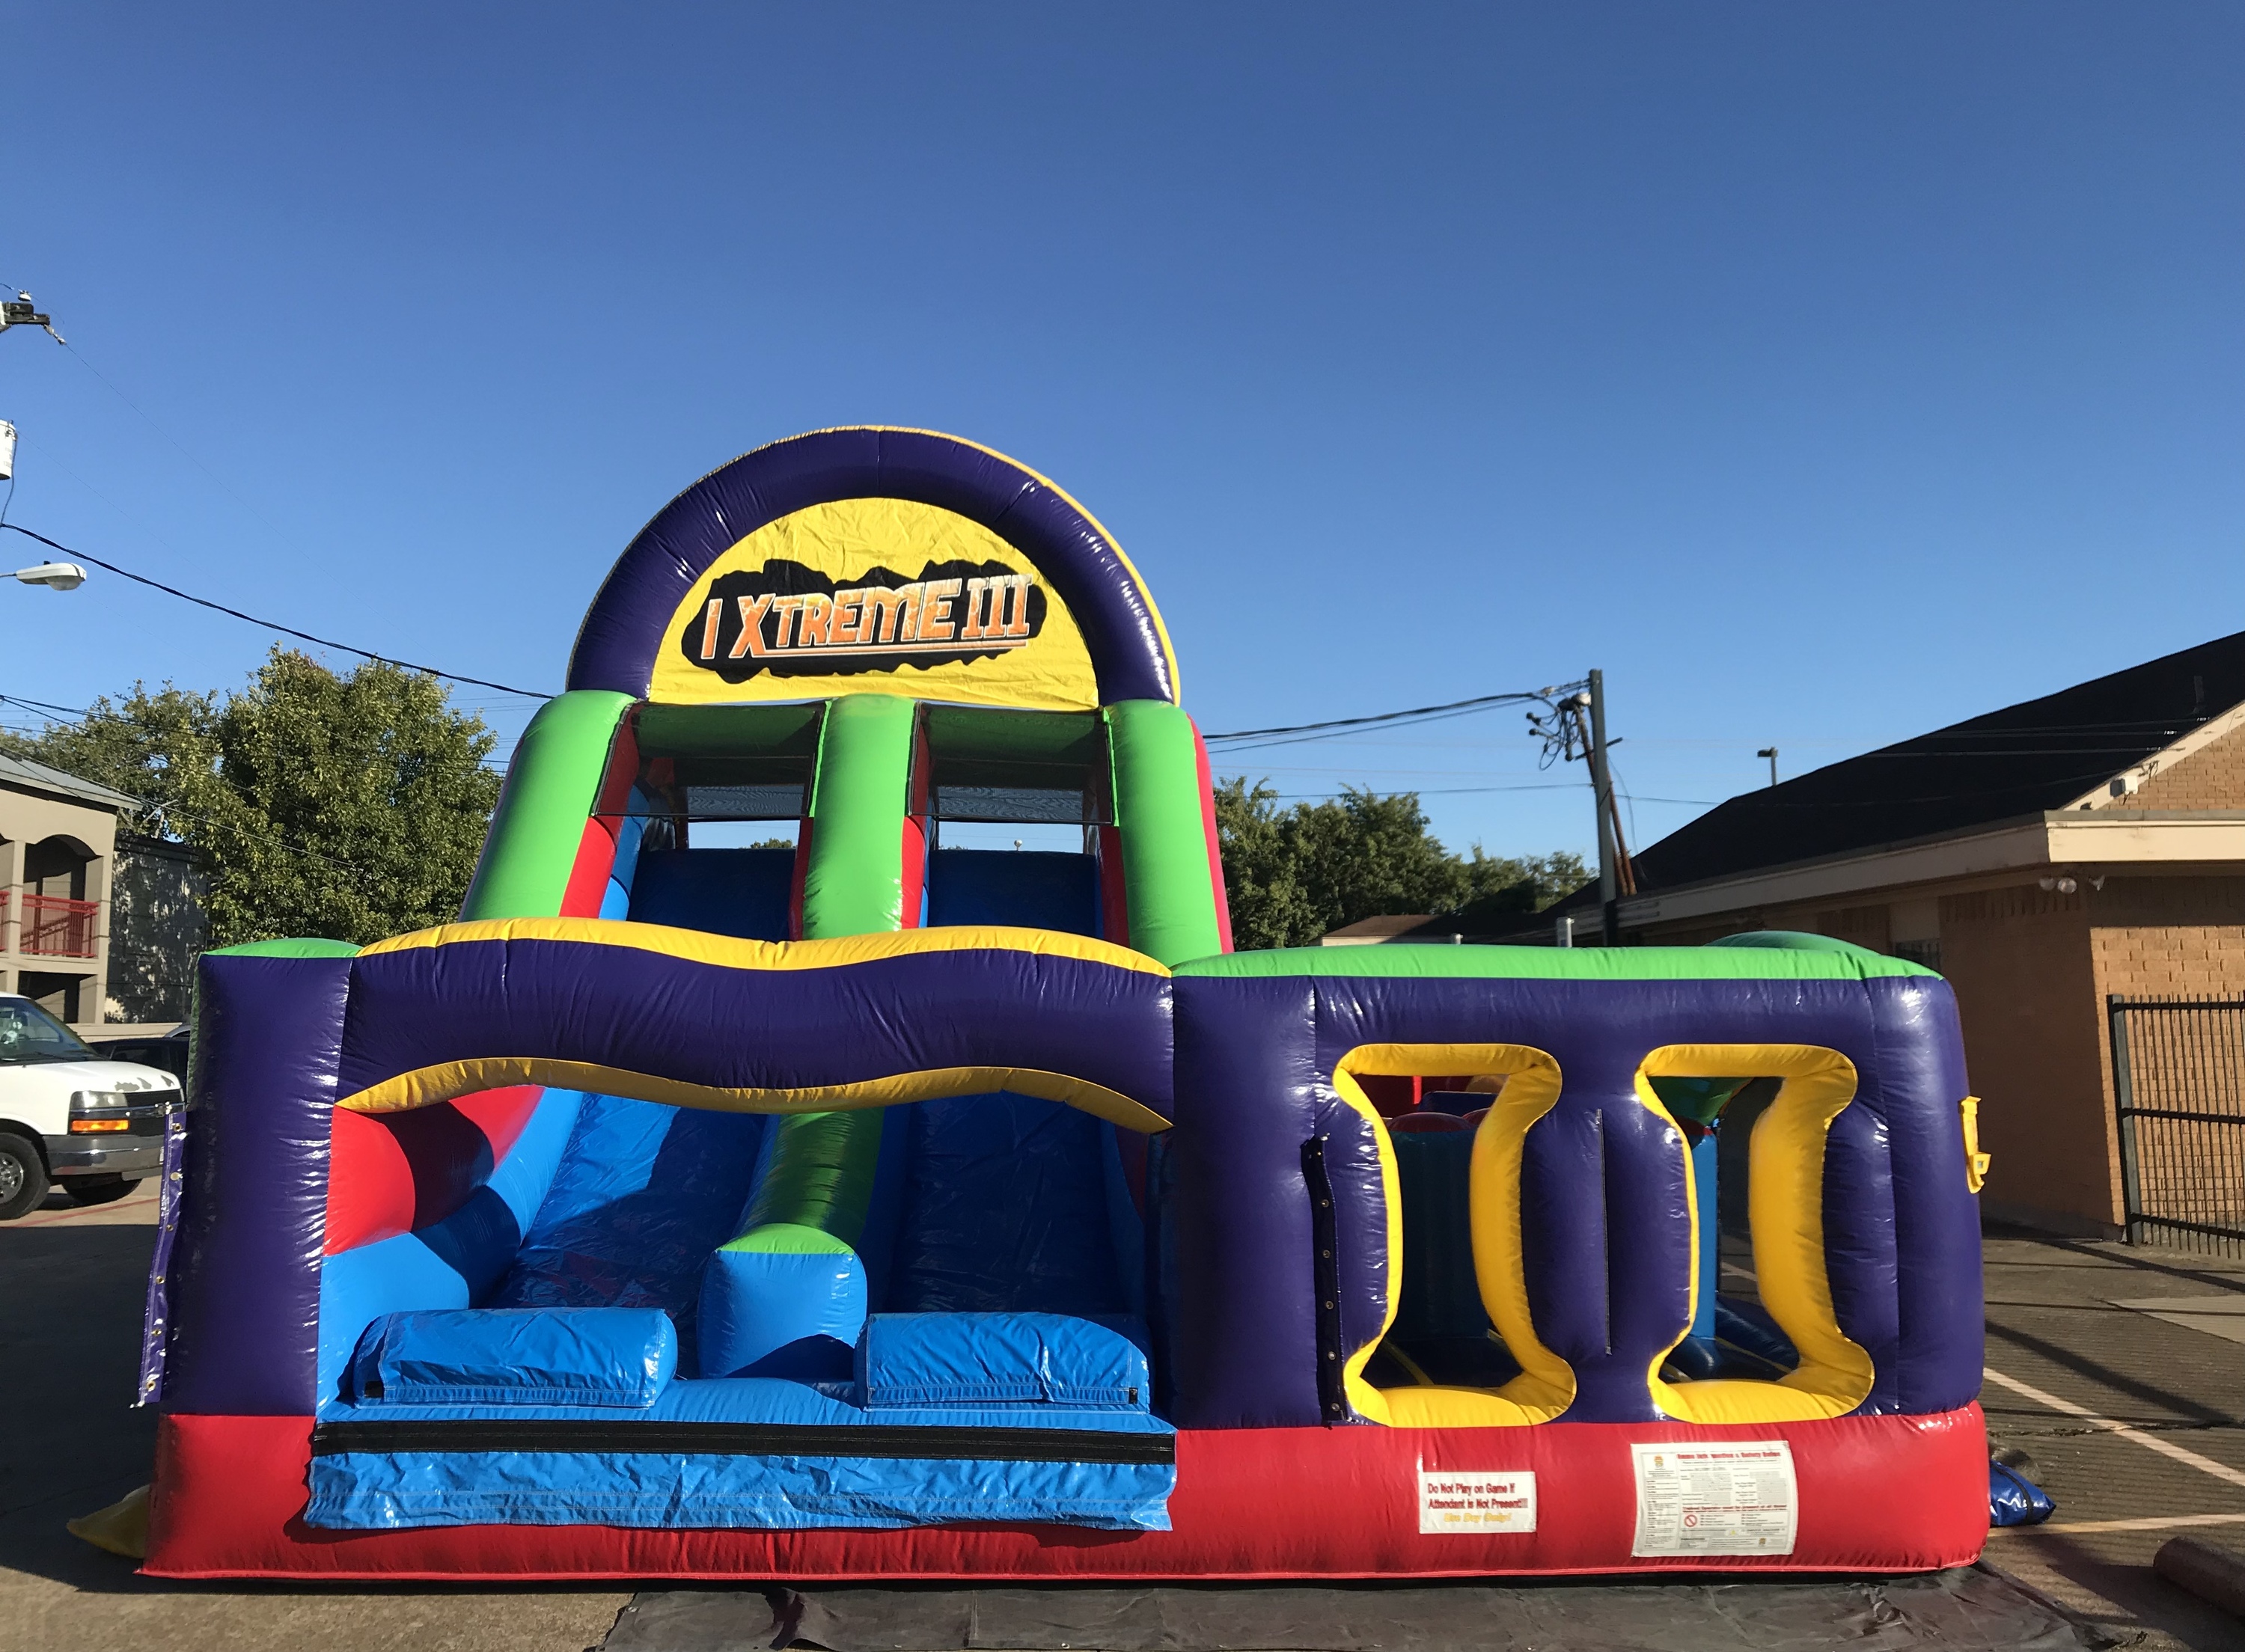 Extreme III Obstacle Course Rental Garland TX